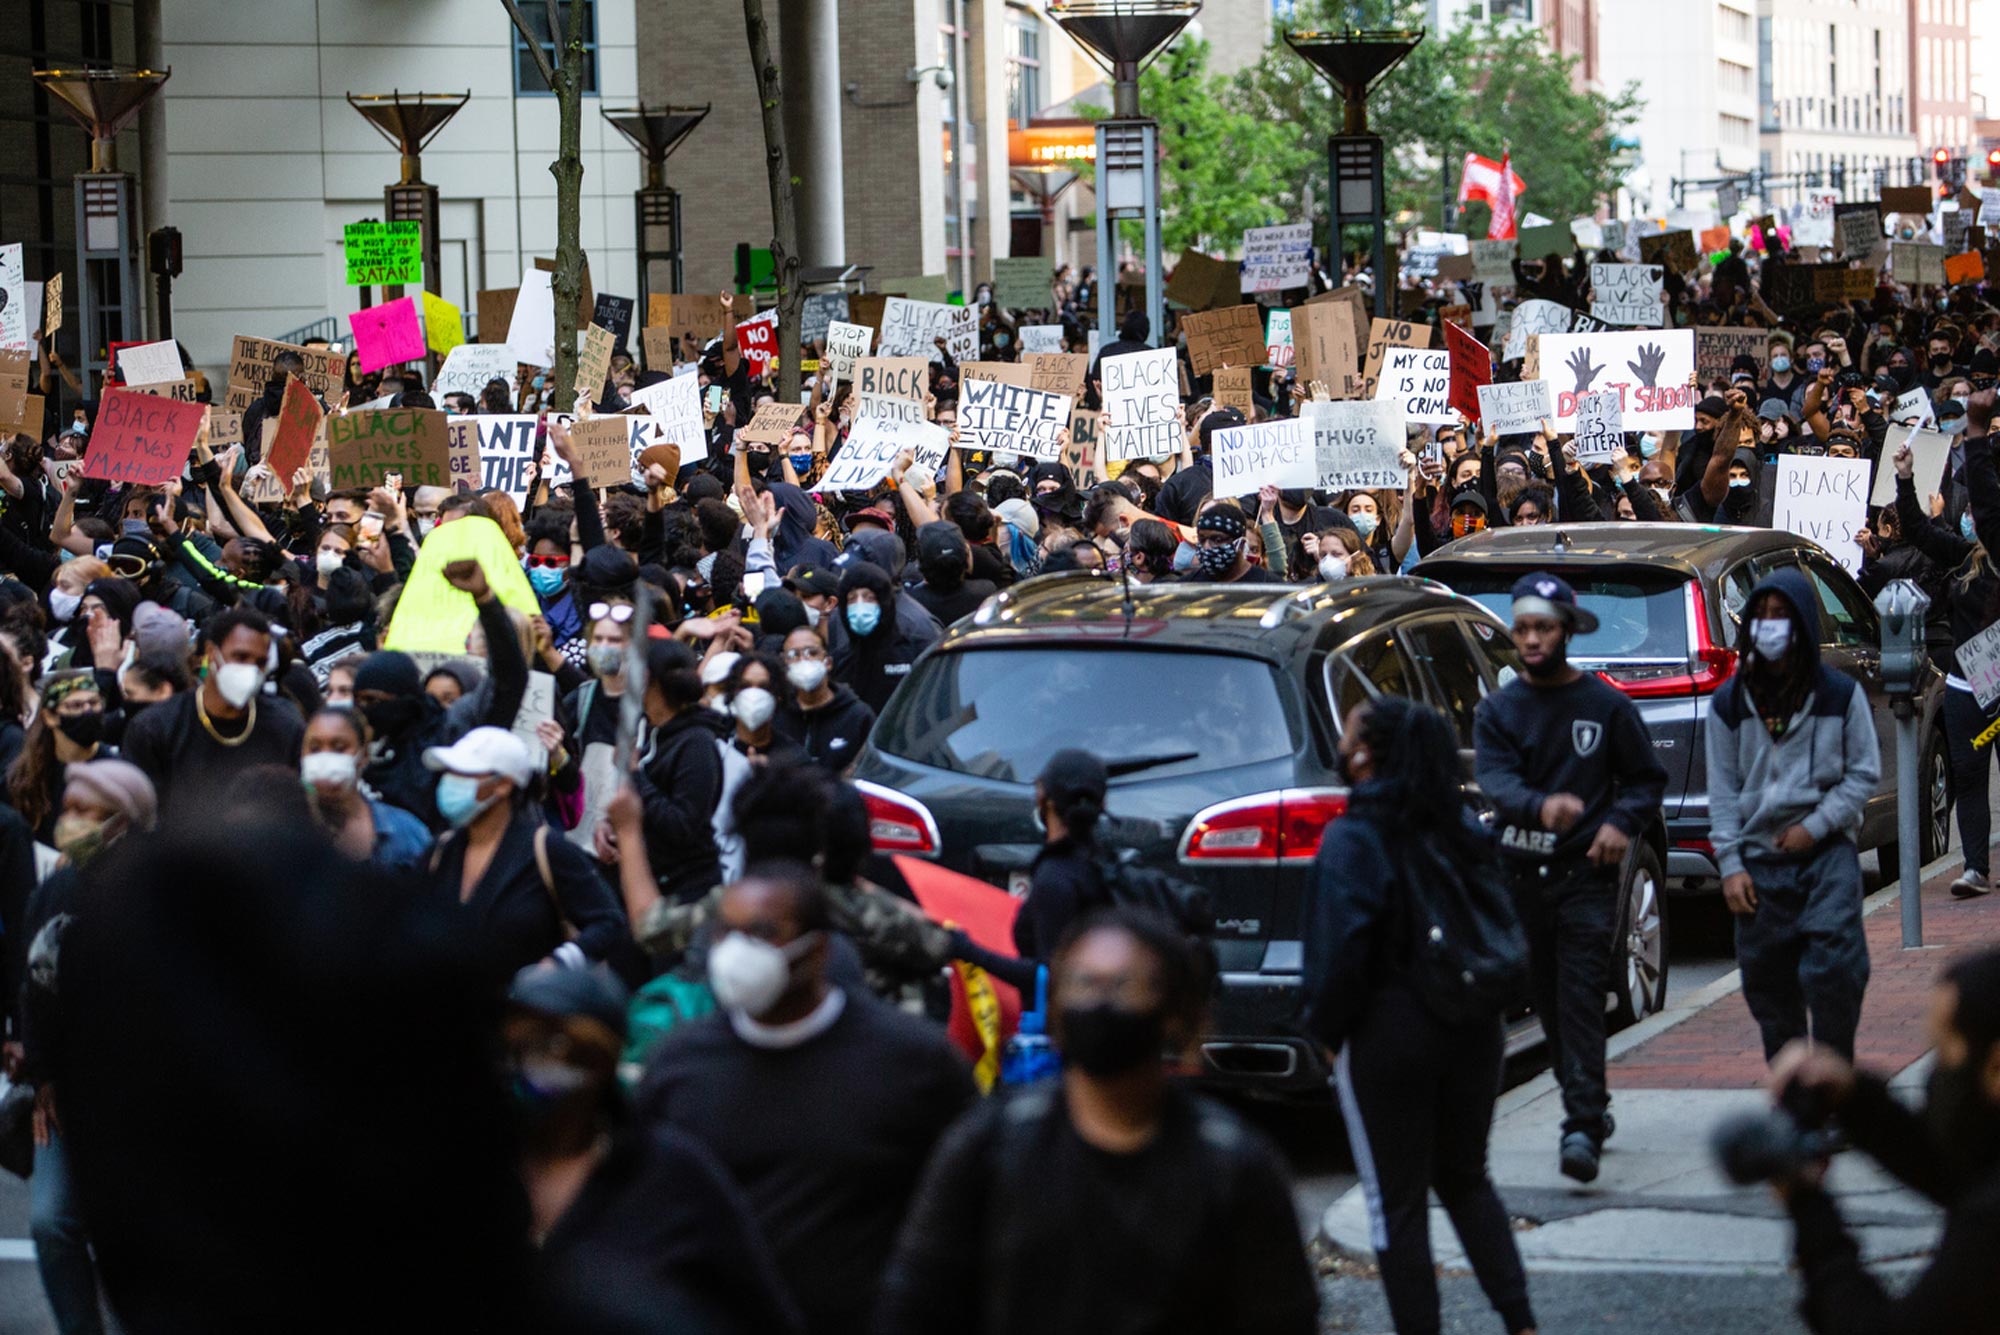 Photo of people took to the streets of Boston on May 31, 2020, protesting the murder of George Floyd. Protesters marched through Tufts Medical Center. Some are seen on sidewalks, a line of parked cars is seen, with most protestors in the streets holding signs.